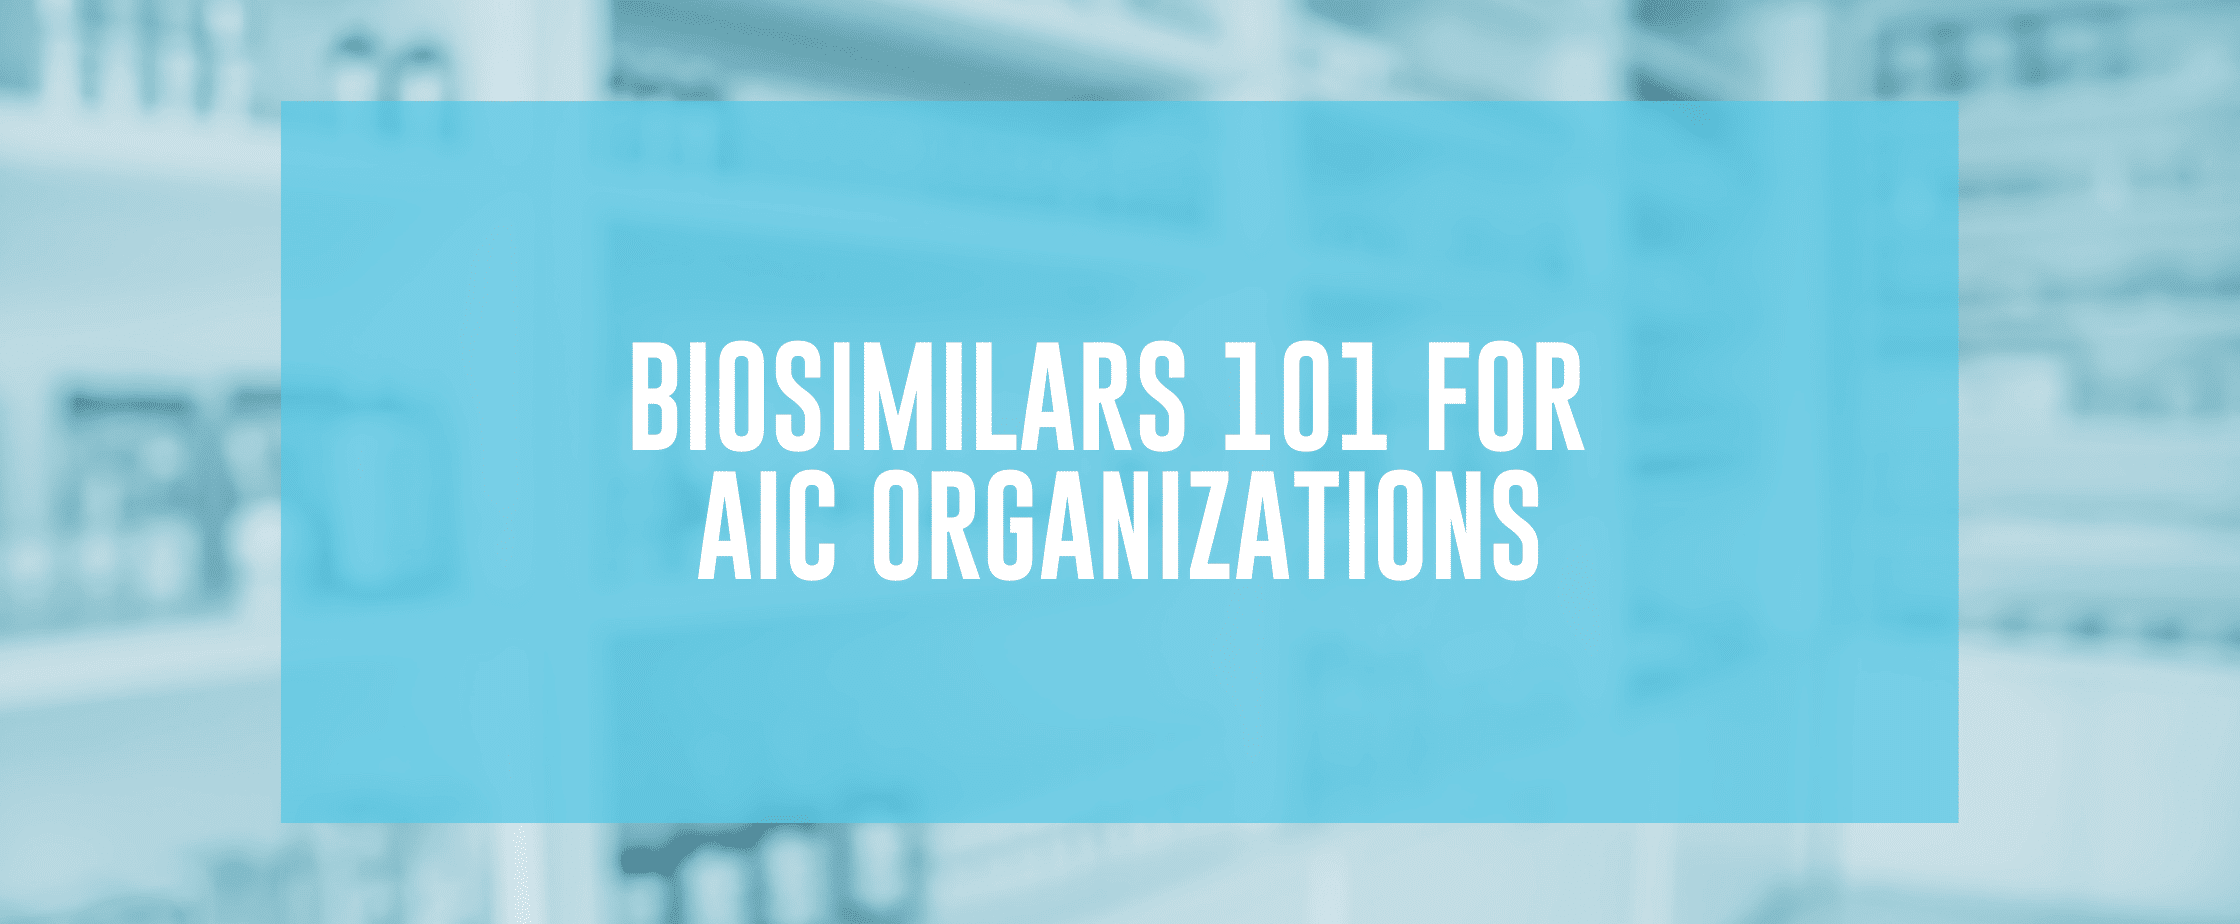 Featured image for Biosimilars 101 for AIC Organizations